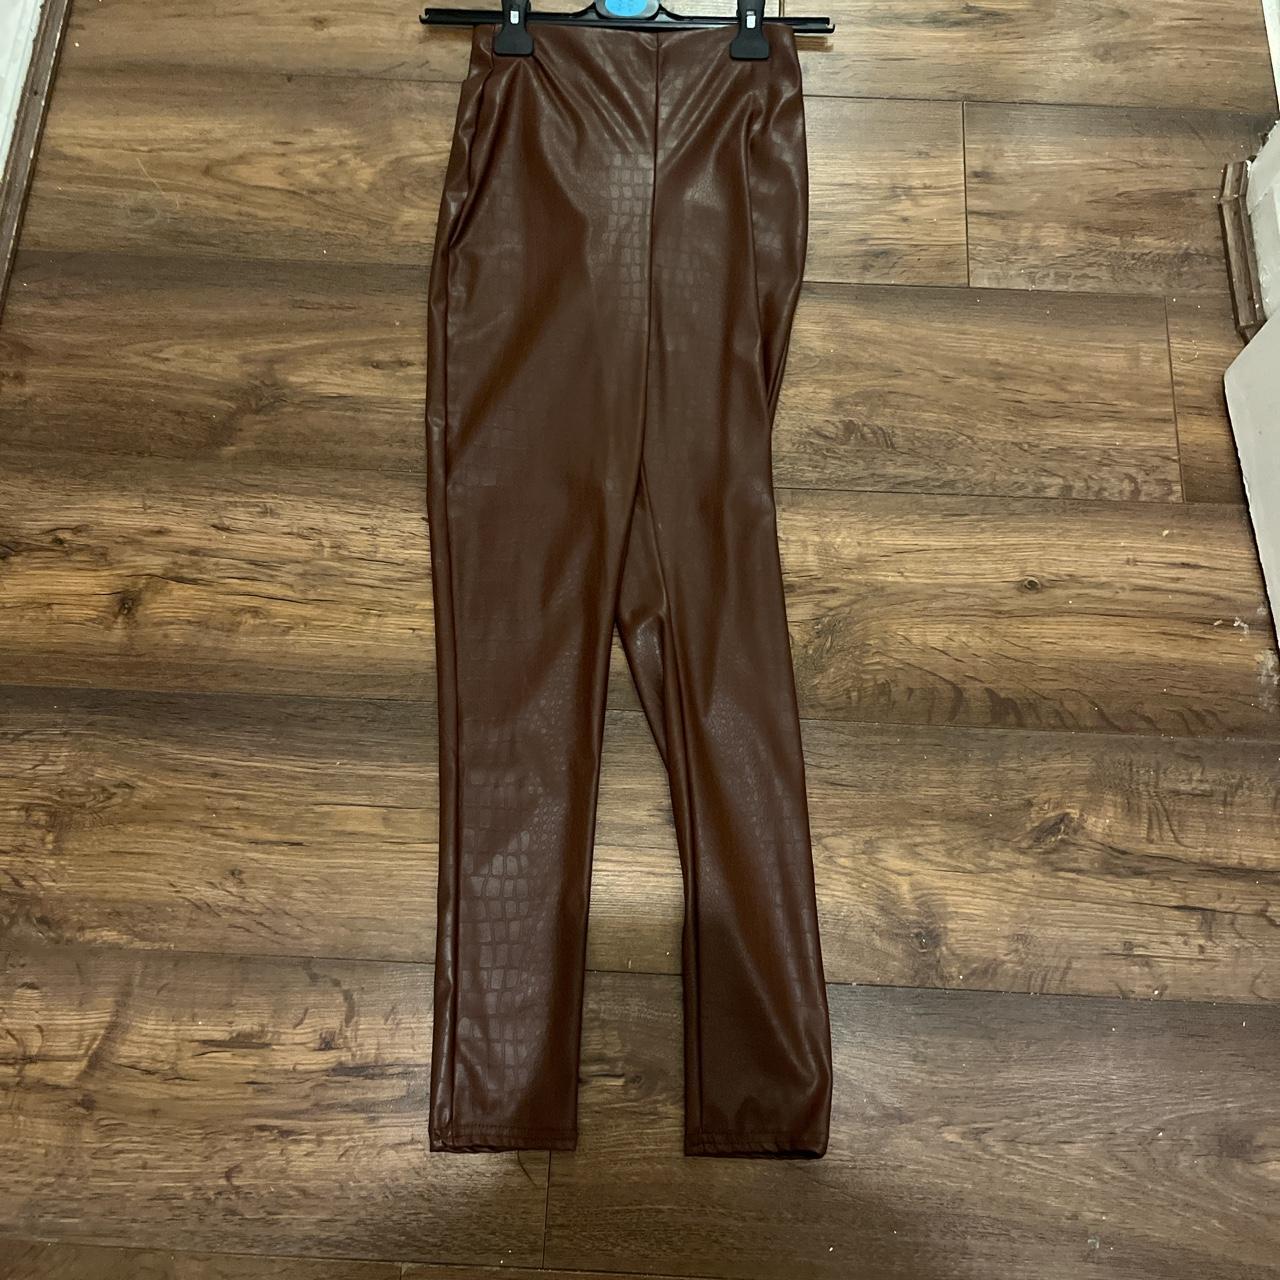 Brand new brown leather pants Never worn - Depop